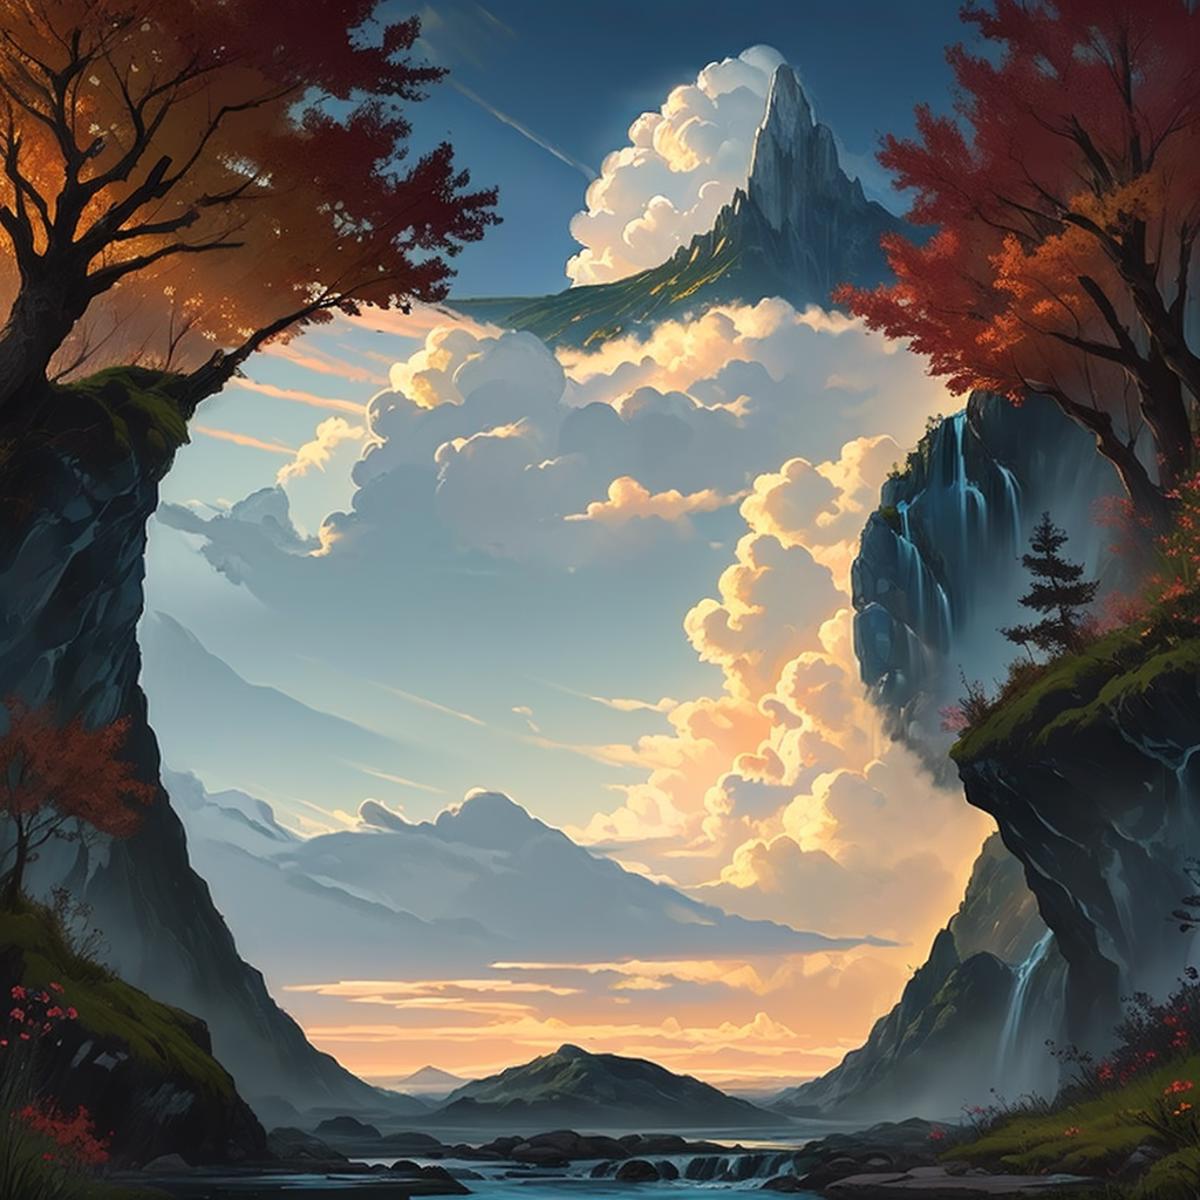 A Painting of a Sunset with Mountain and Clouds.